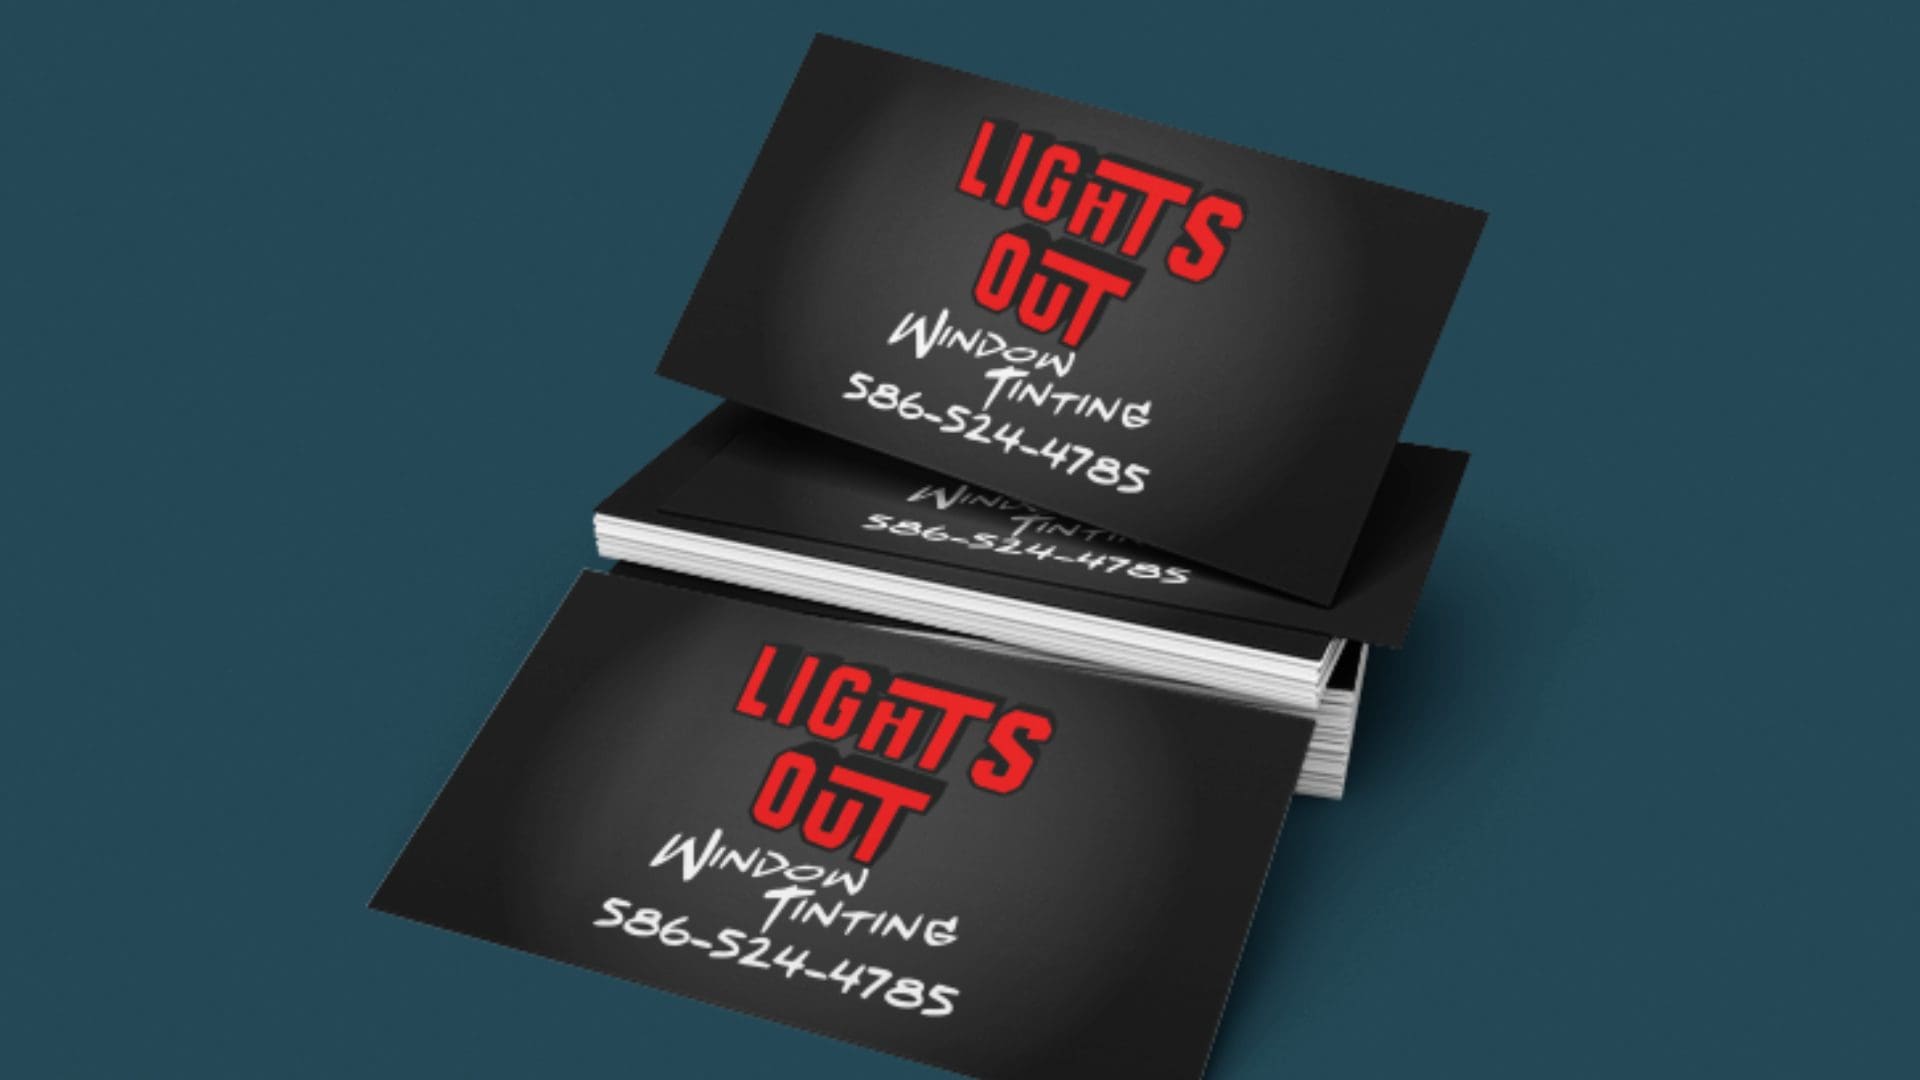 Lights Out Window Tinting - Business Card Mockup (5)